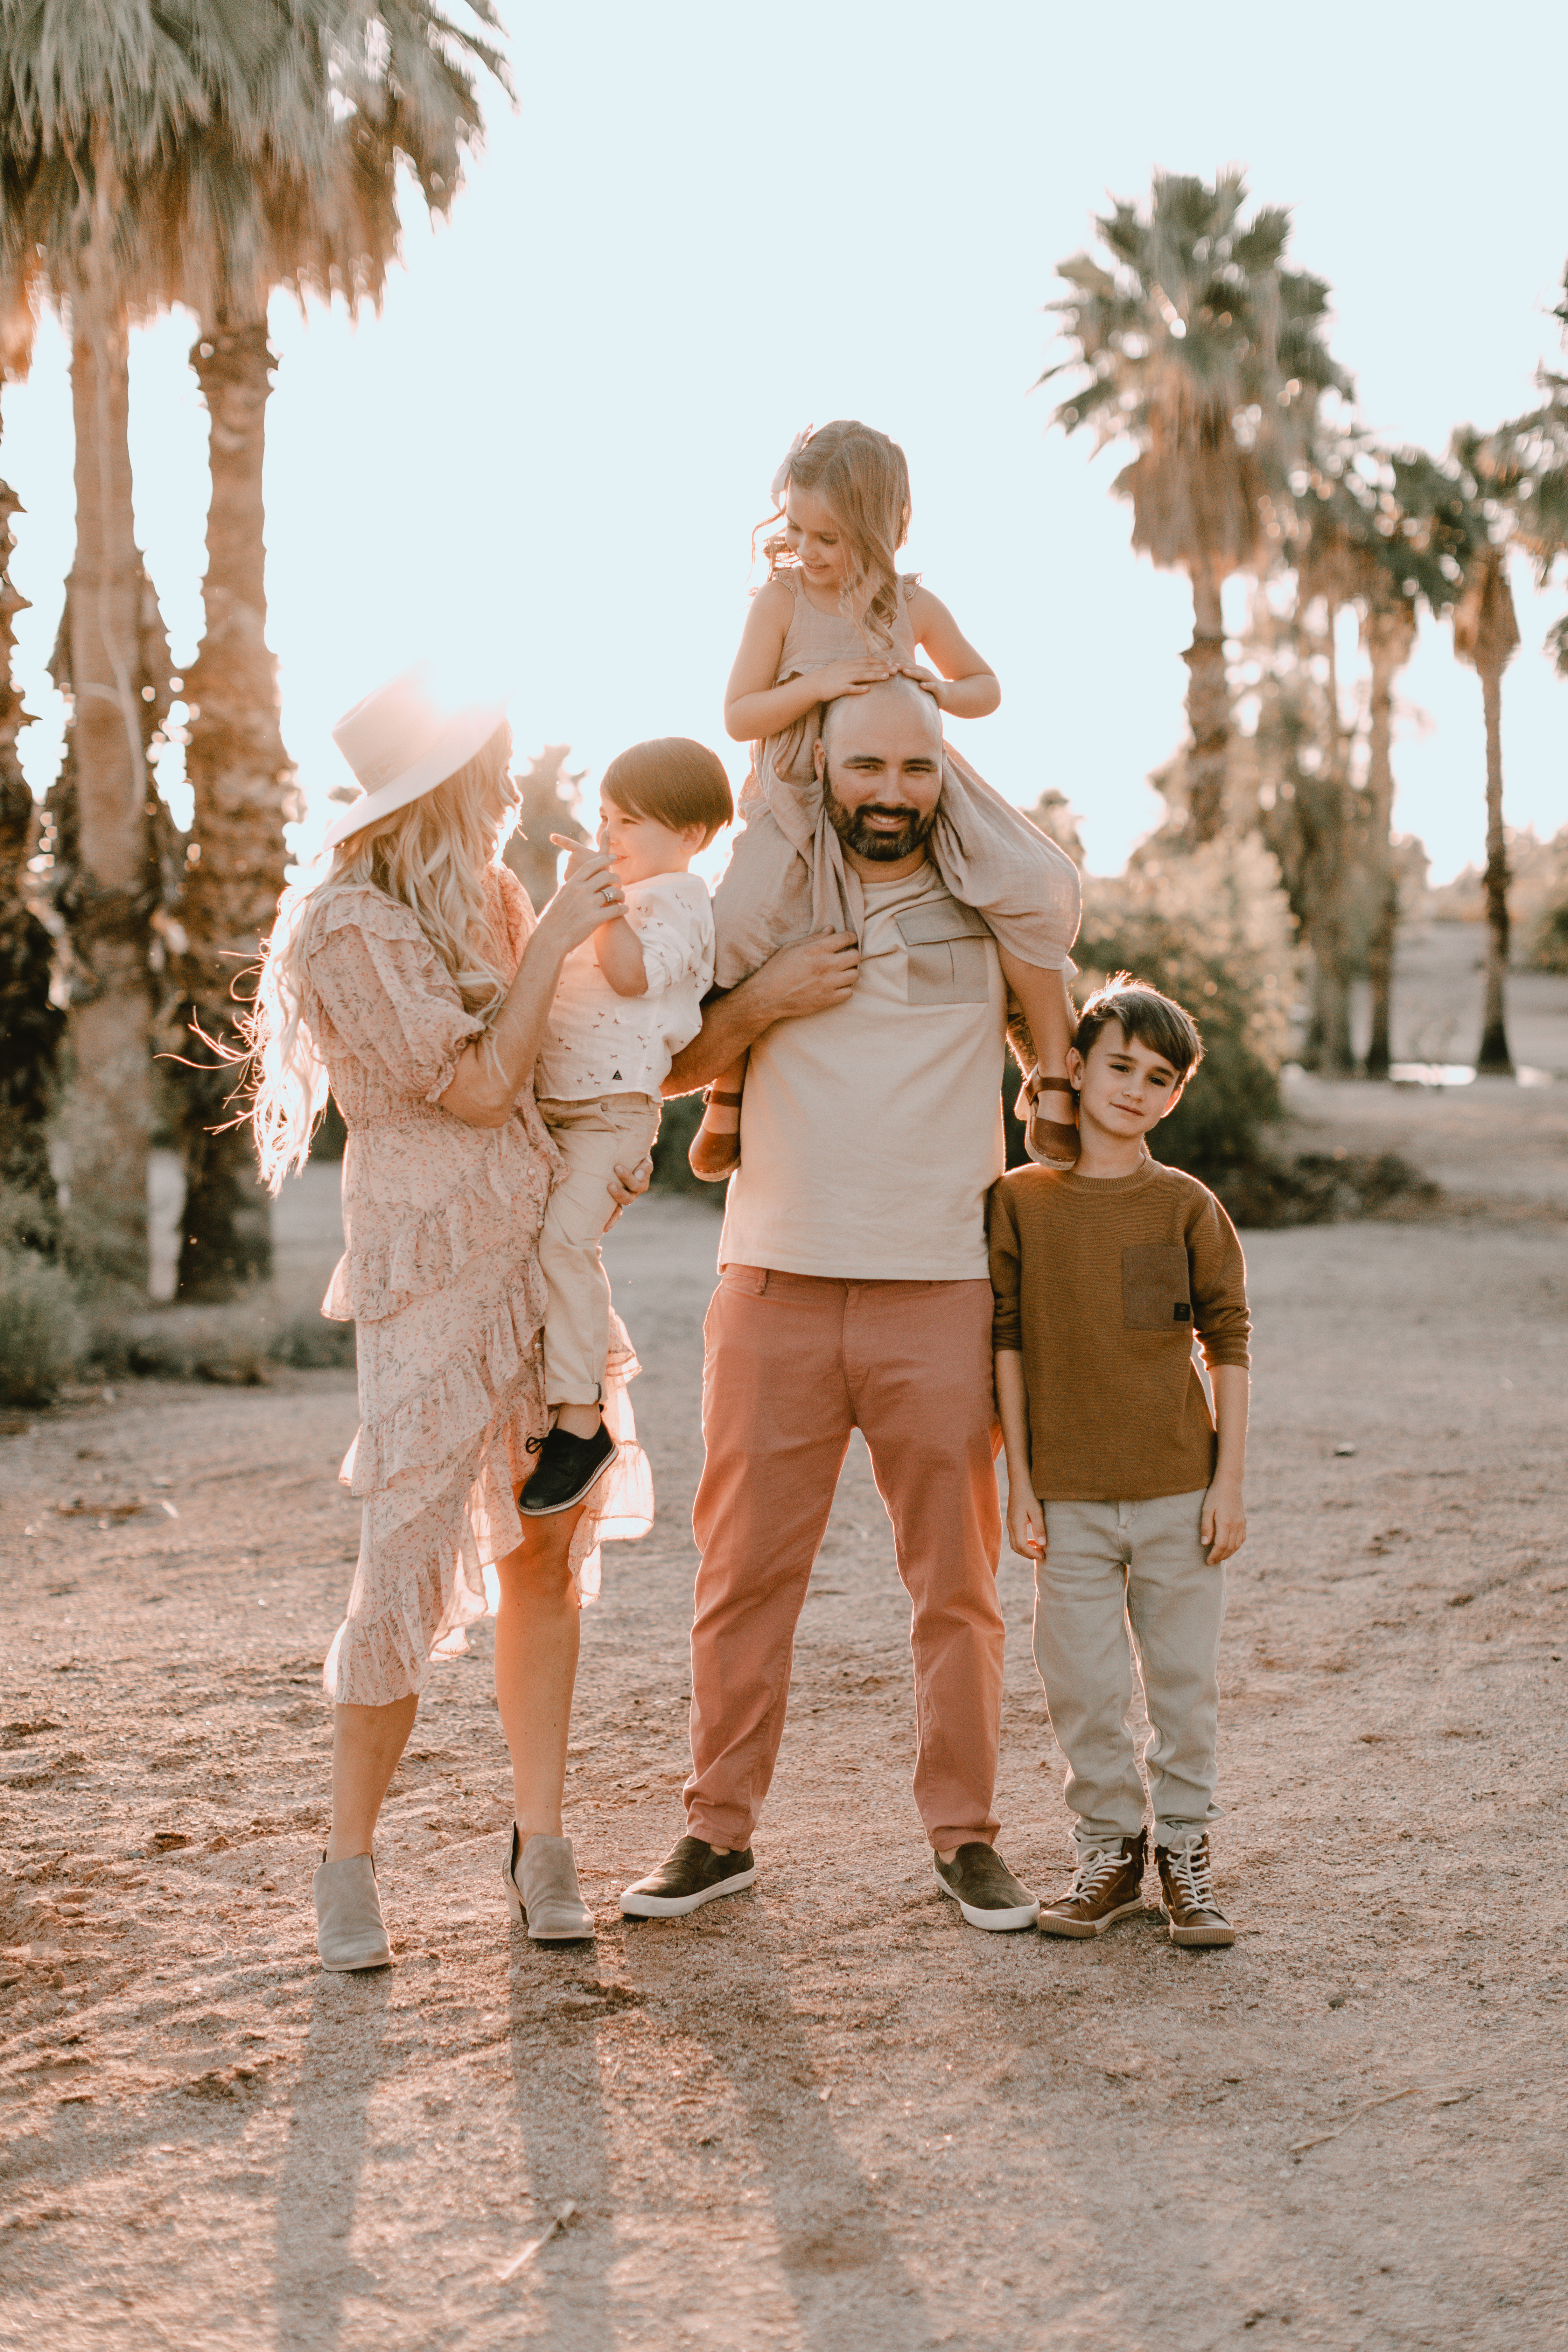 family photo, 5 people, standing, golden hour #familyphotos